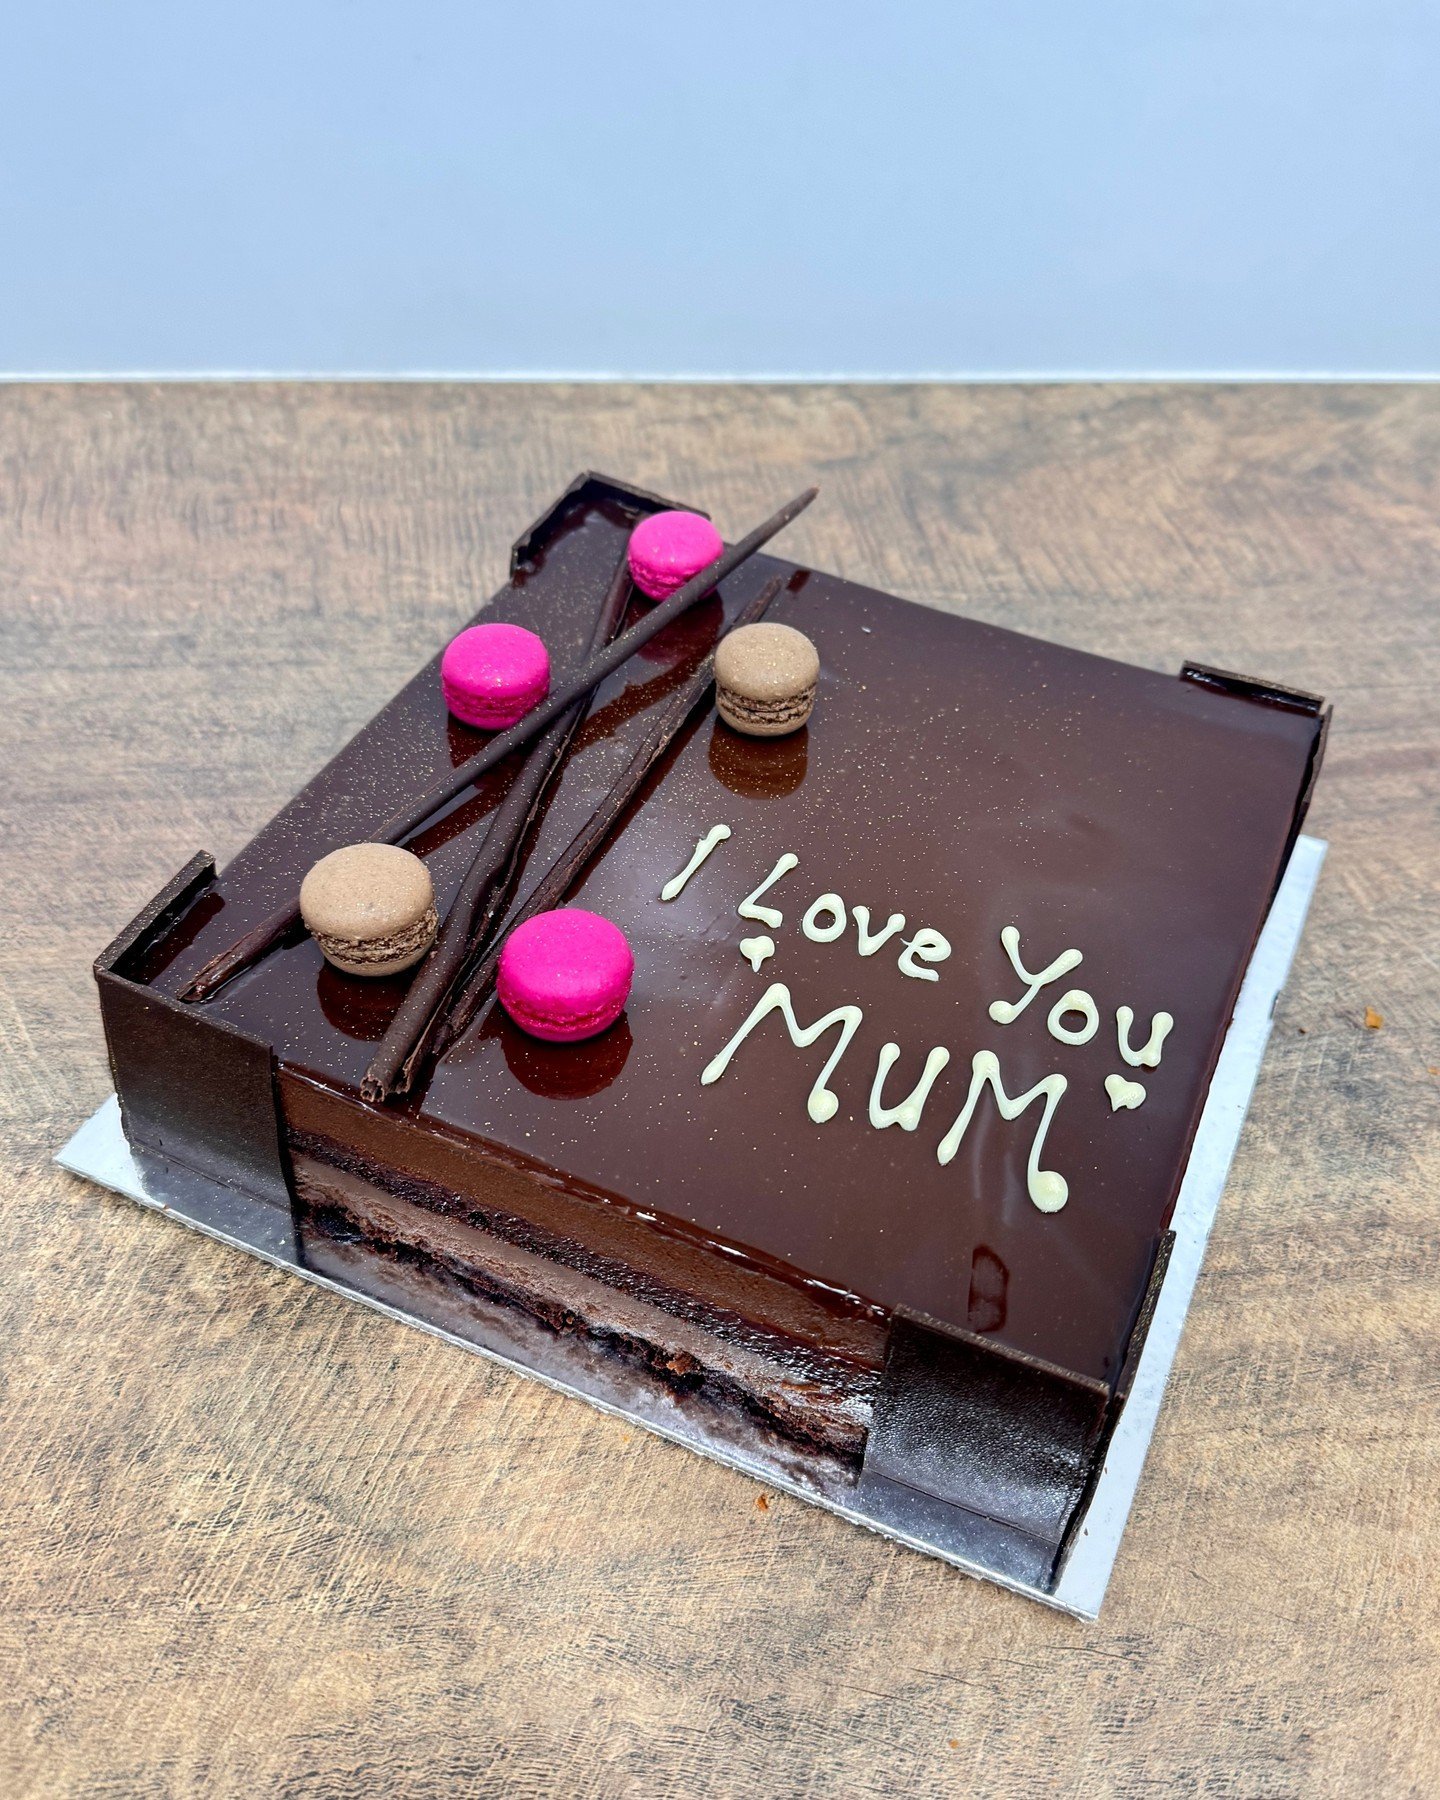 A gift as sweet as her! 🍰

@crustbakeryfyshwick's family size, rich chocolate truffle and raspberry cake is available for preorder now for pick up on Sunday. These decadent cakes will sell out early on Mother's Day, so preorder or come in early to a